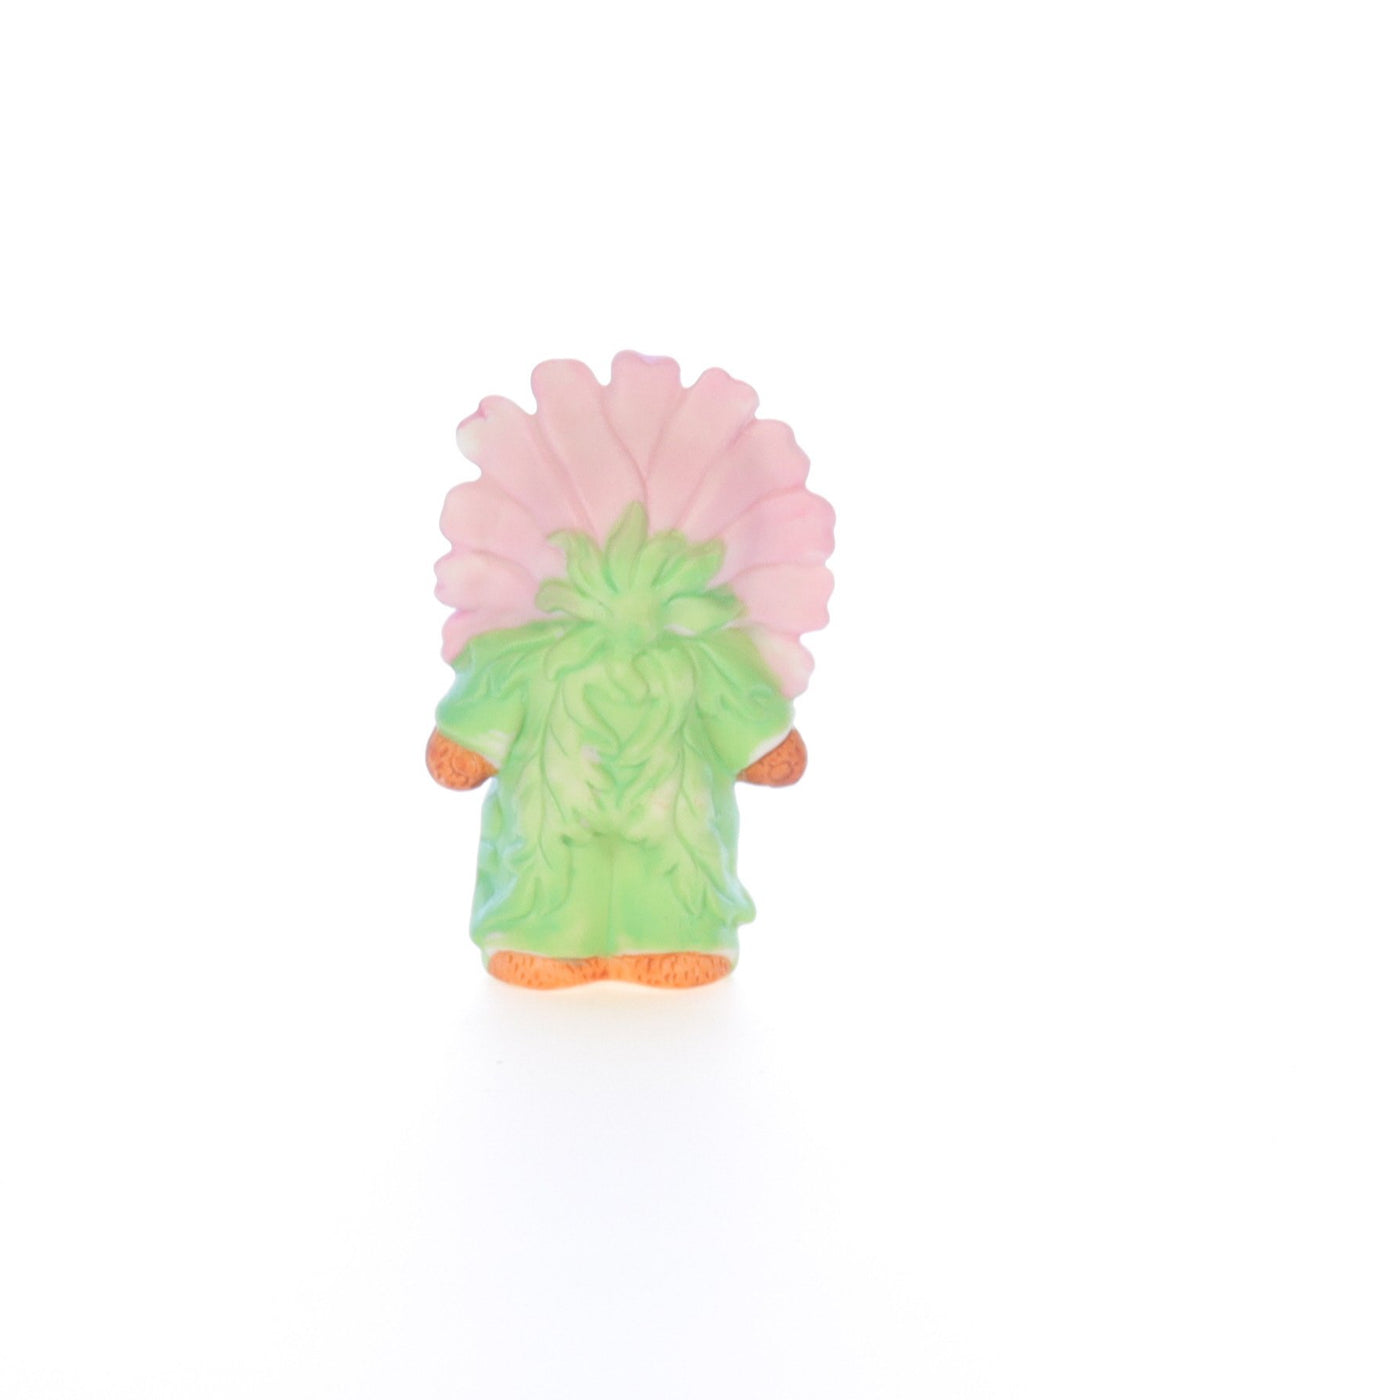 Lucy_And_Me_by_Lucy_Atwell_Porcelain_Figurine_Bear_with_Pink_and_Green_Flower_Costume_Lucy_Unknown_012_05